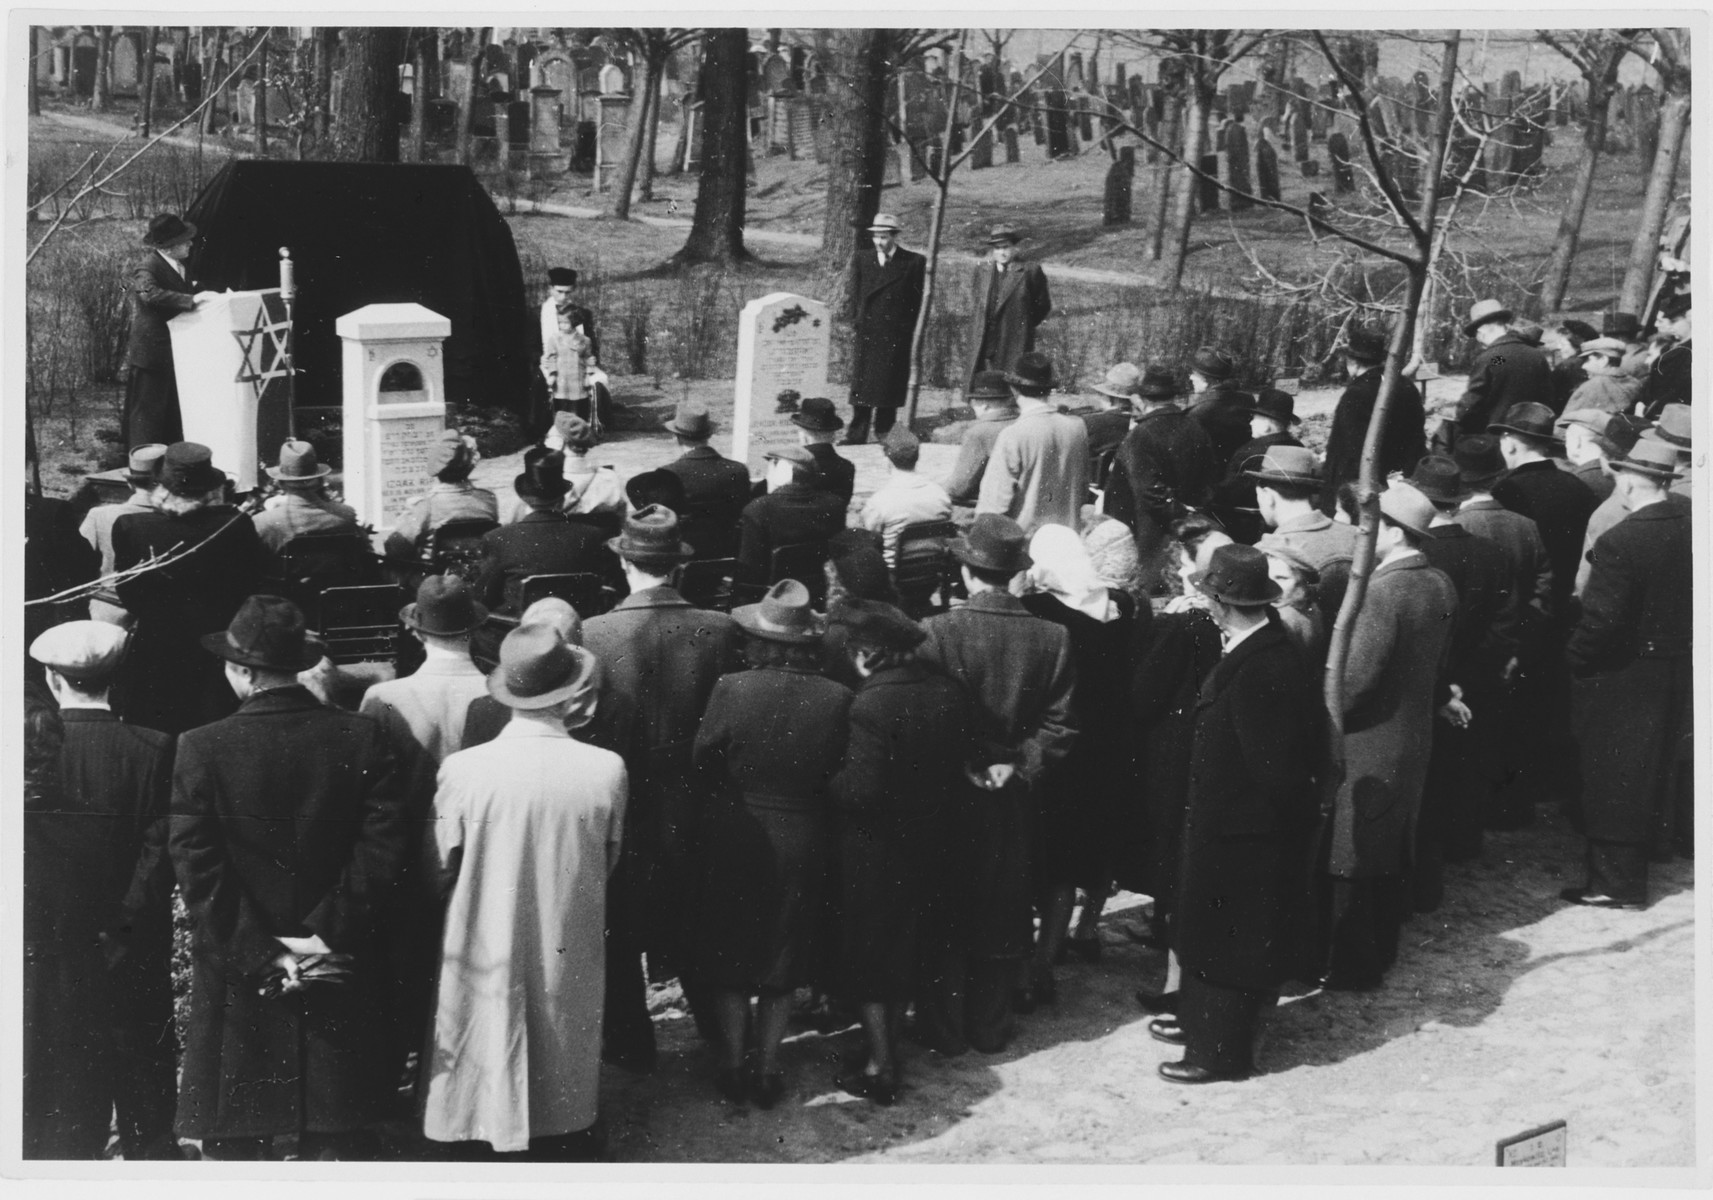 Jewish DPs attend the rededication ceremony of the Jewish cemetery in Luebeck.